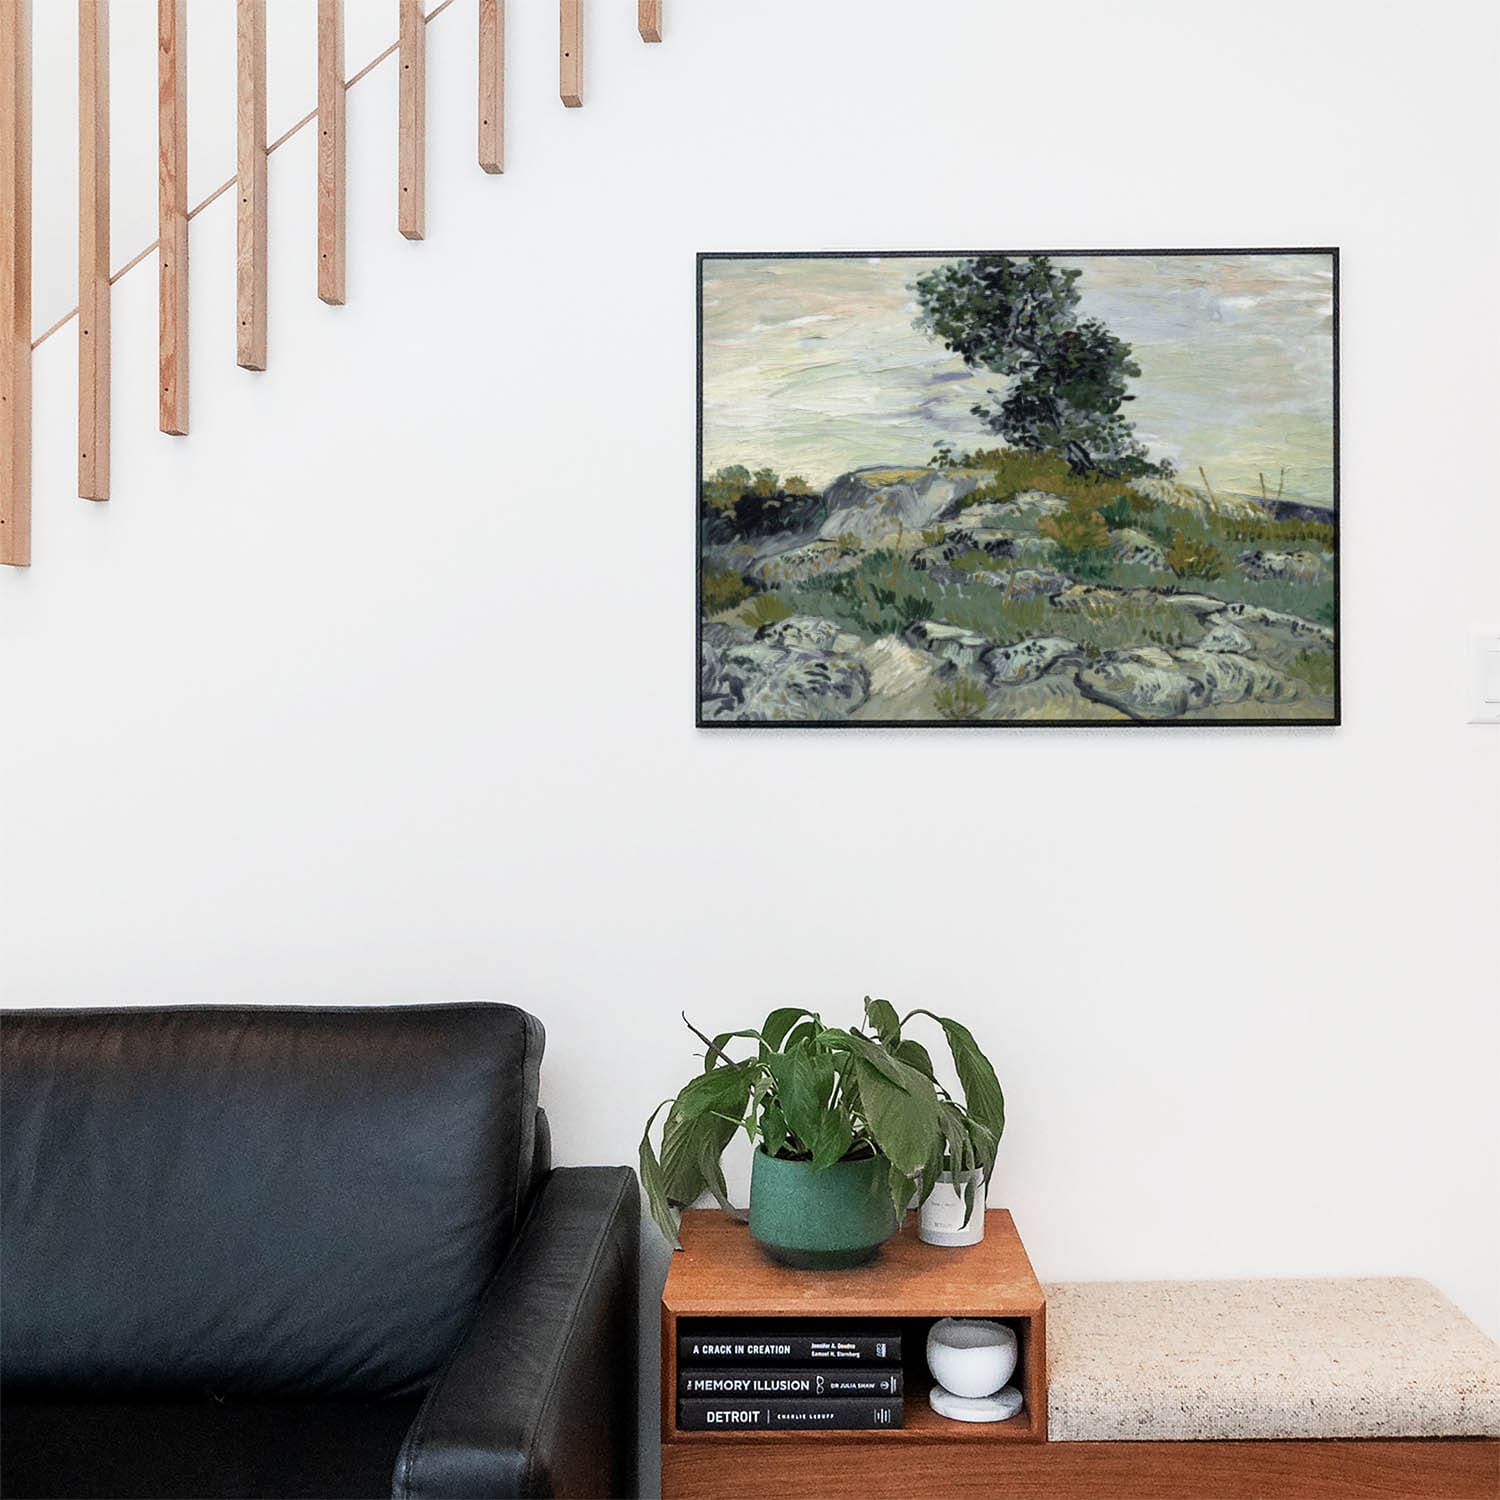 Living space with a black leather couch and table with a plant and books below a staircase featuring a framed picture of Brushstrokes of Nature